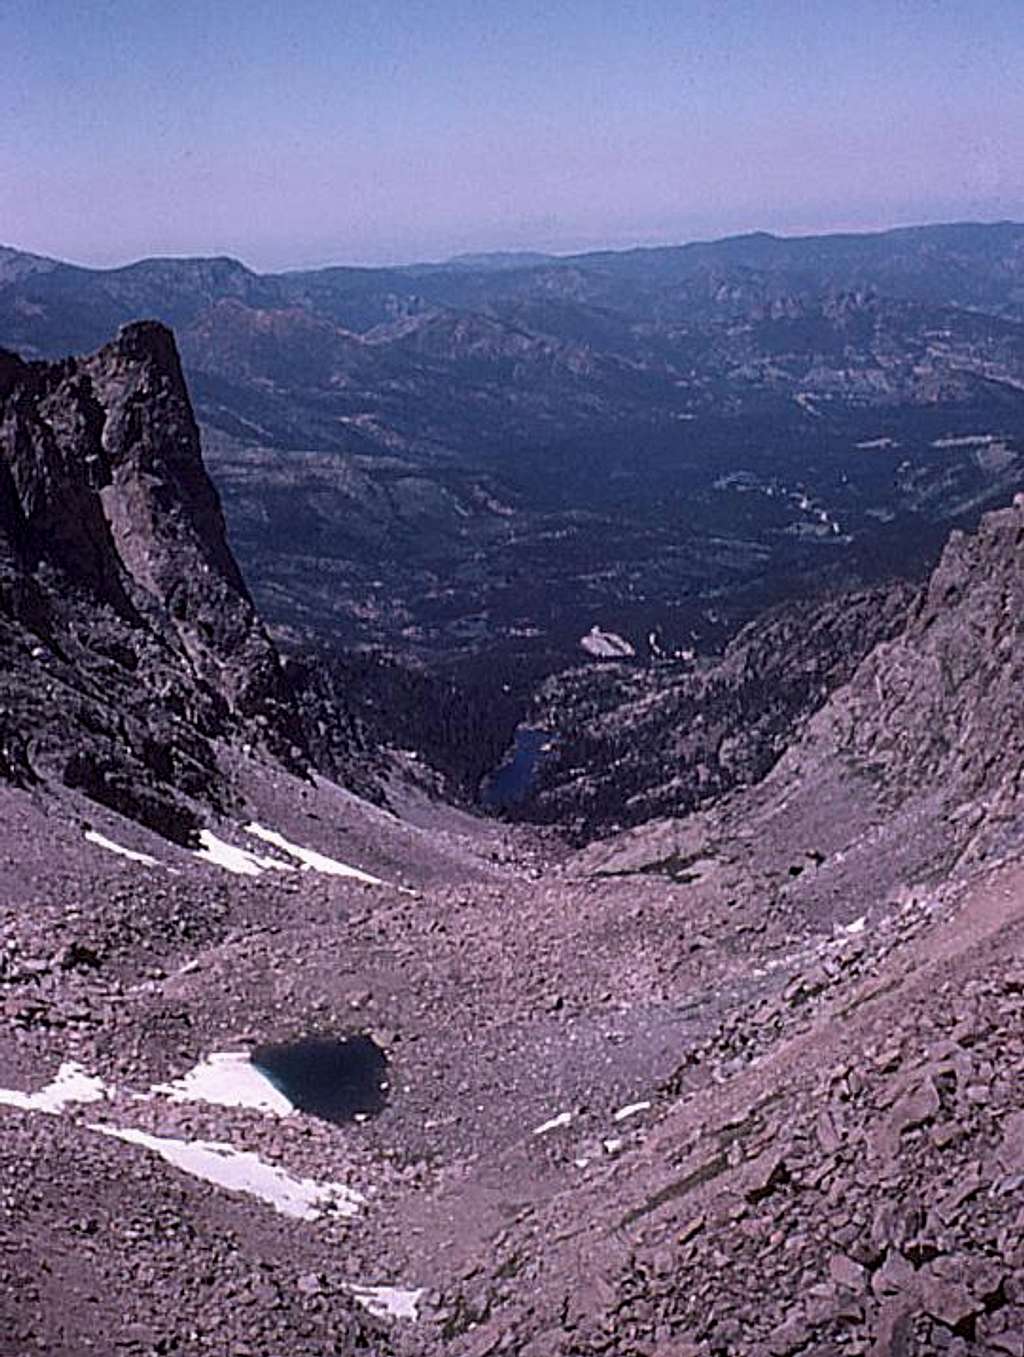 Rocky Mtn High 1975 - Looking back at Tyndall Gorge